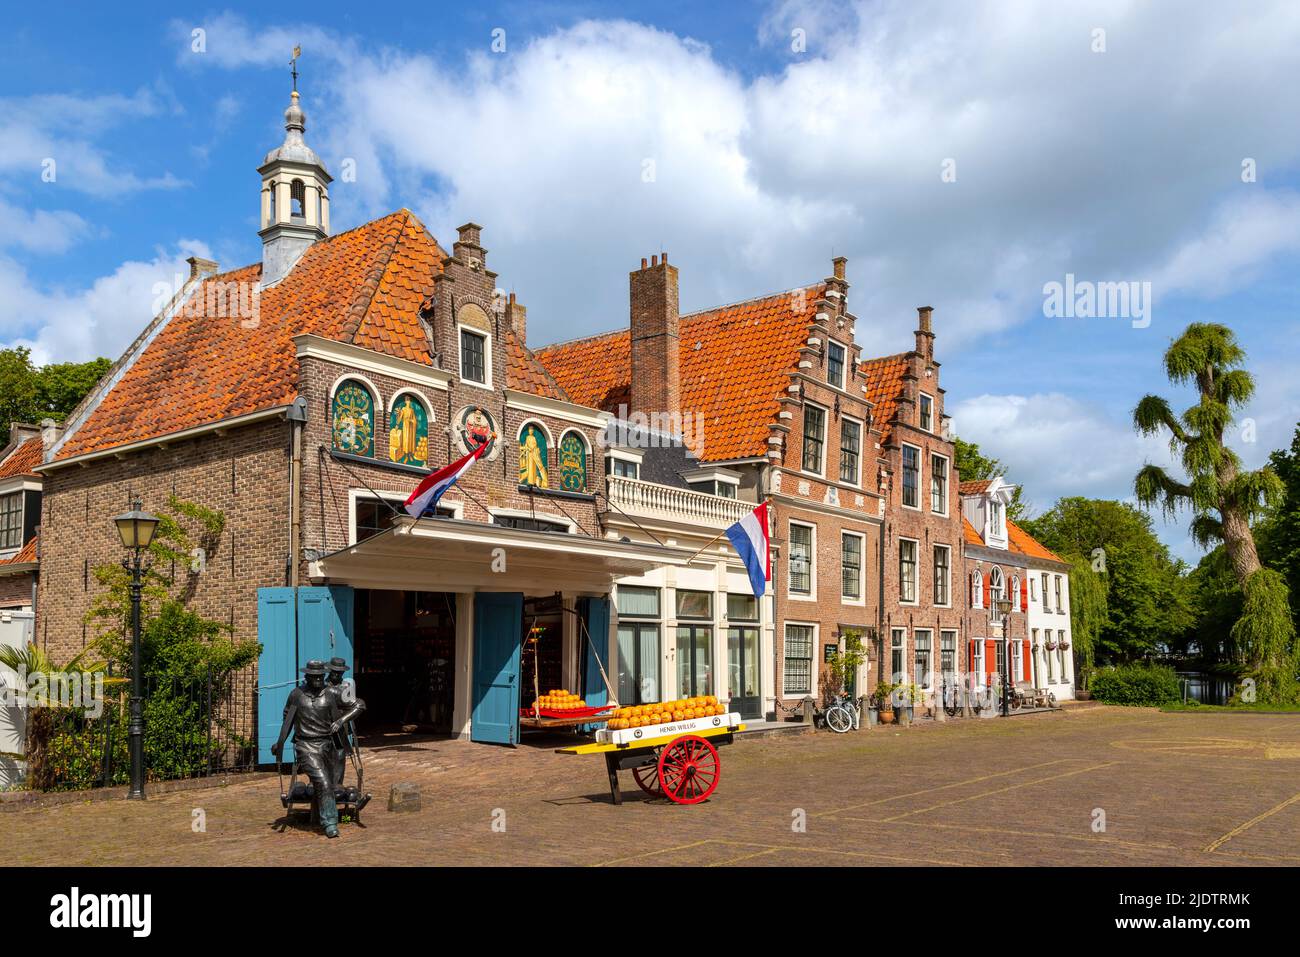 The historic weighing house (cheese ), an 18th century building and a distinct landmark in the market square of Edam, North Holland, The Netherlands. Stock Photo